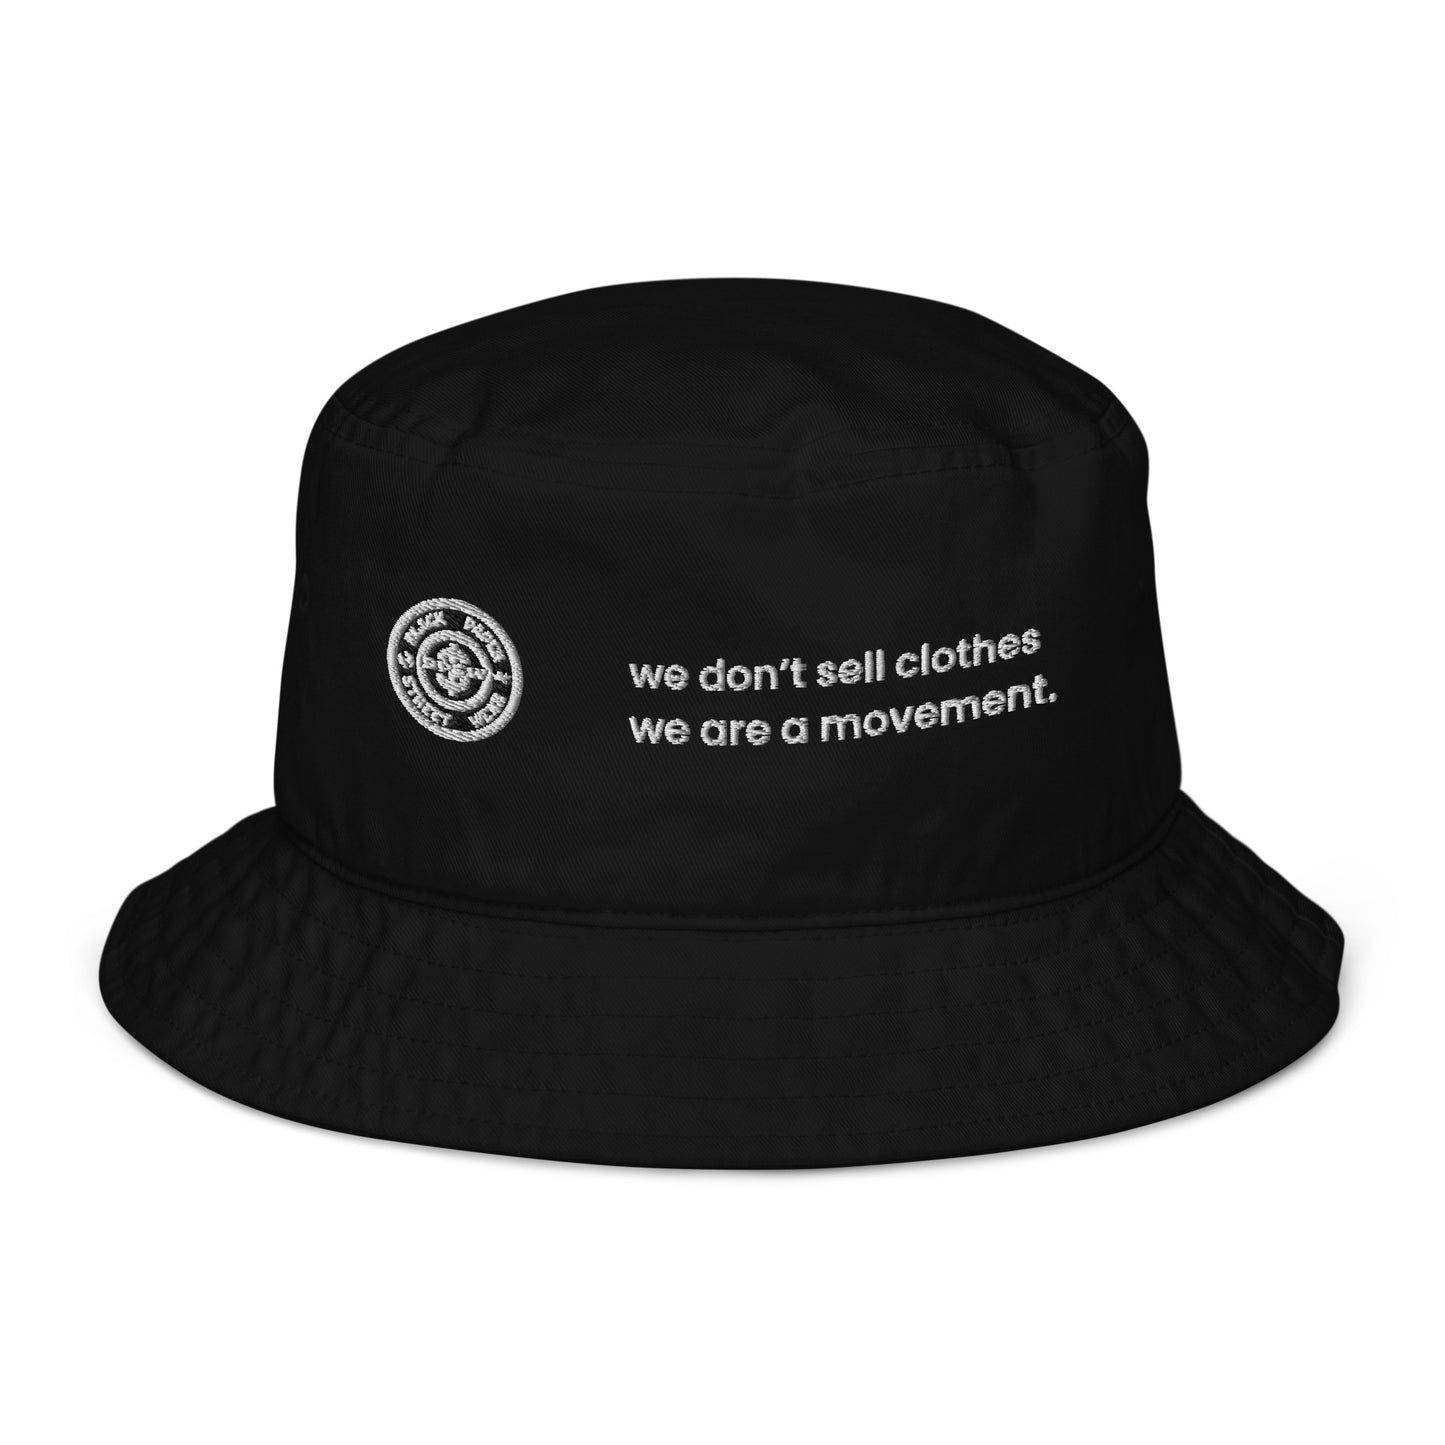 Hats - WE ARE A MOVEMENT(bucket hat)